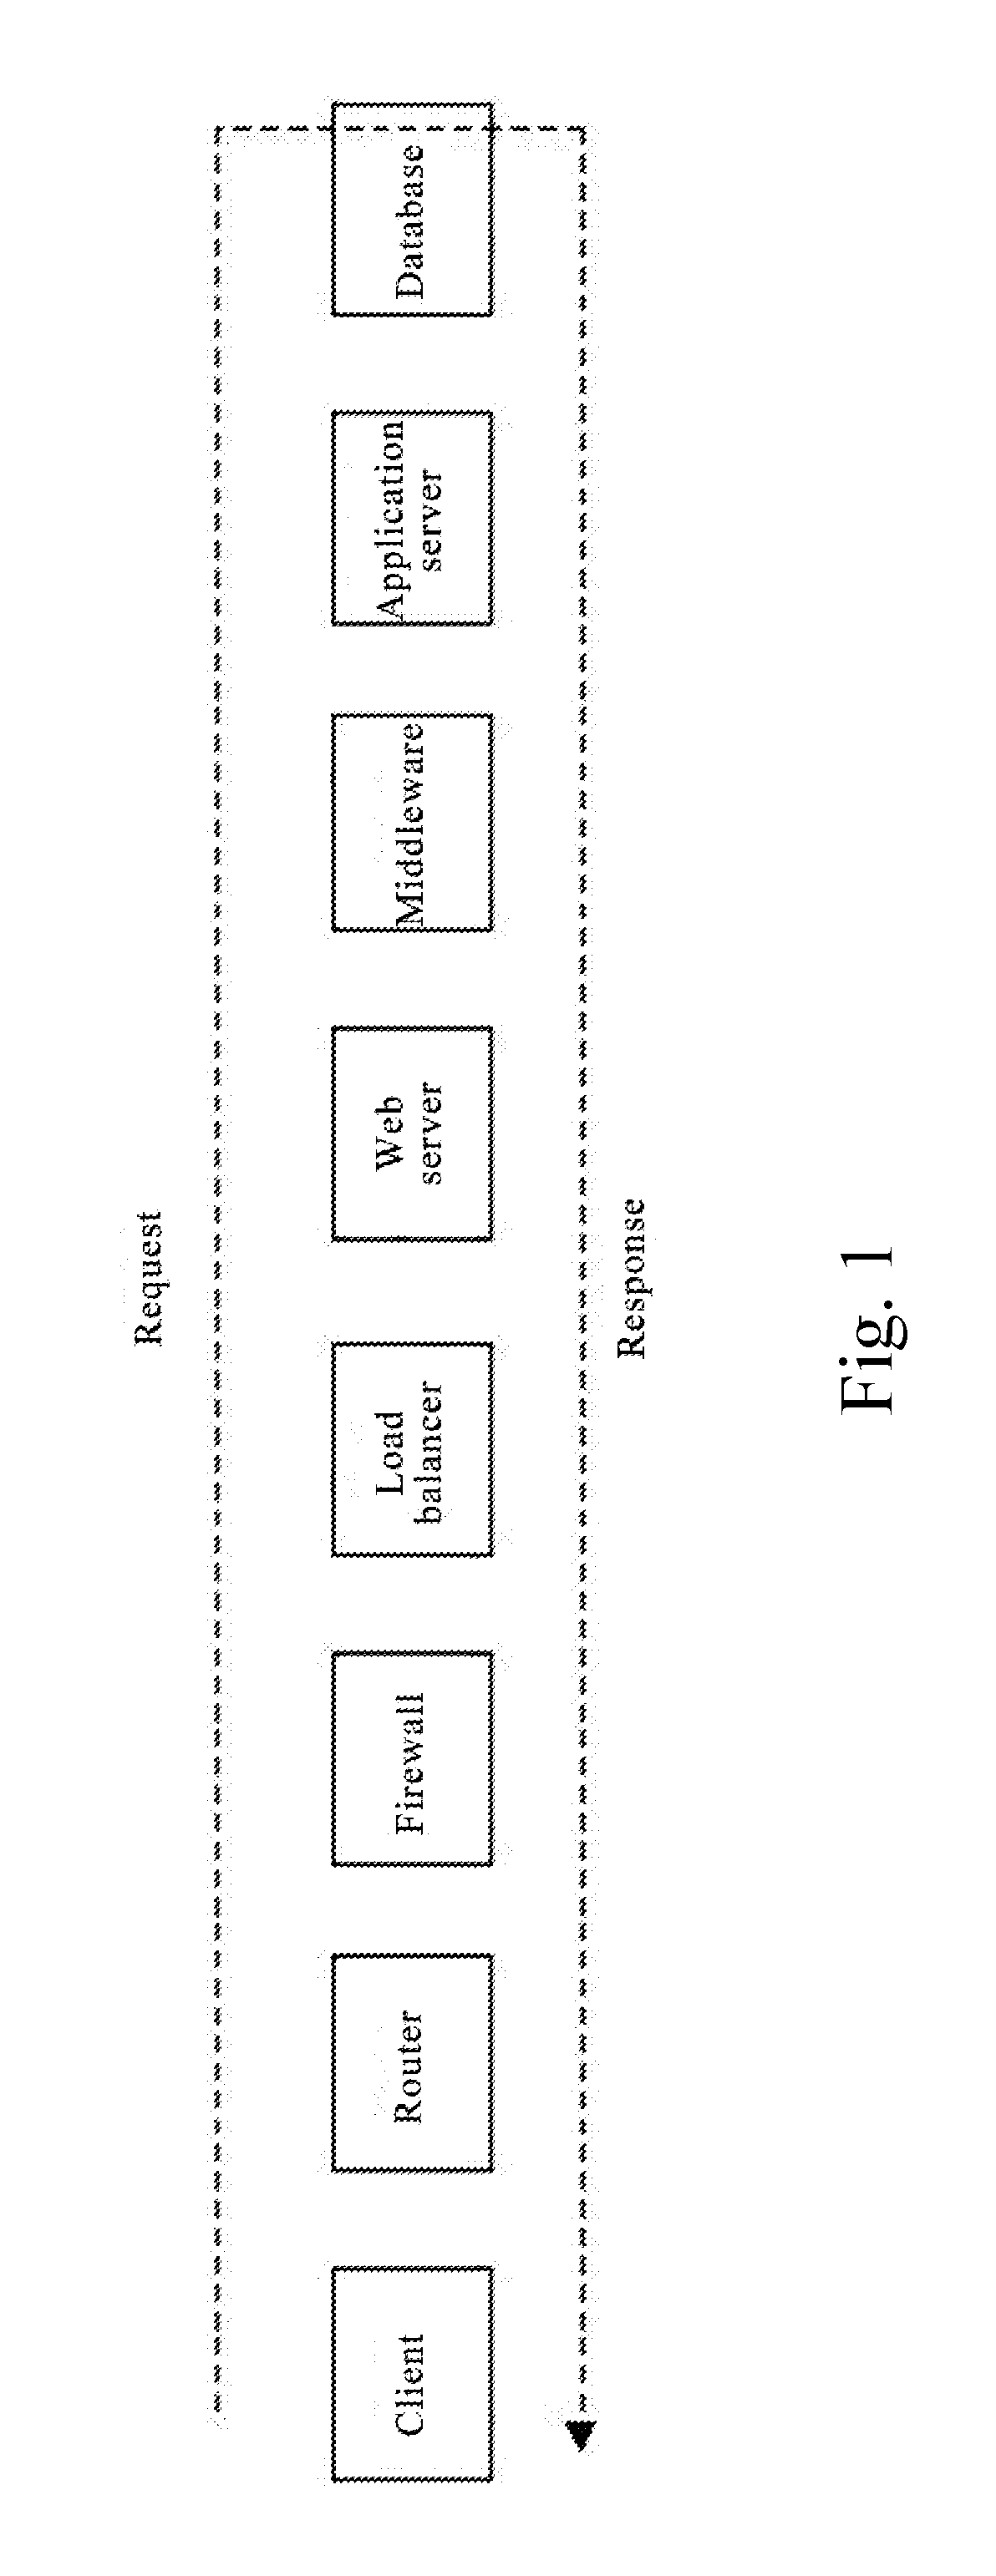 System and Method for Associating a Multi-segment Component Transaction